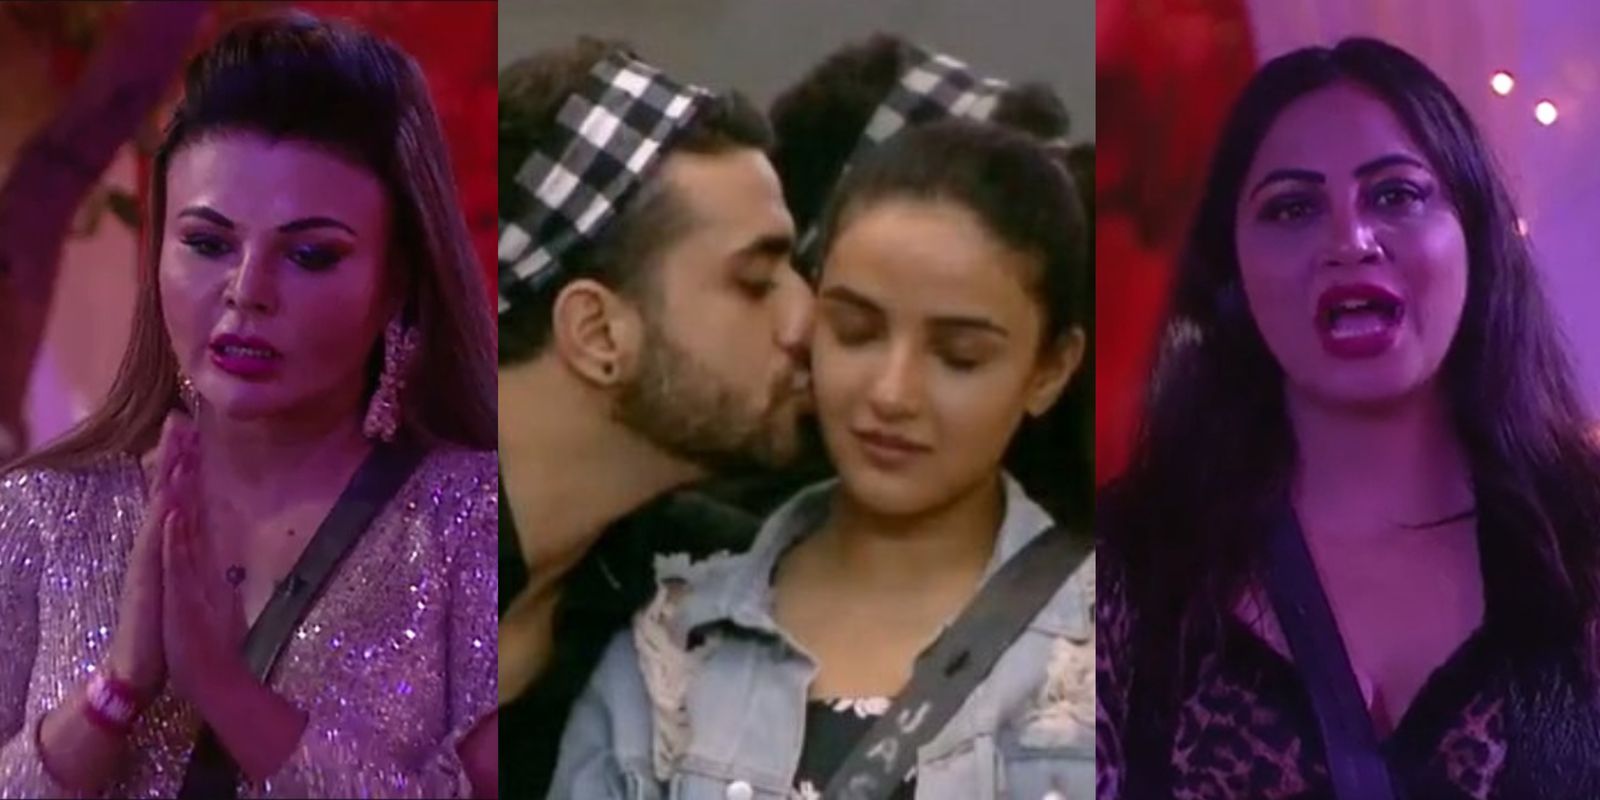 Bigg Boss 14 Promo: Arshi, Rakhi, Rahul Mahajan Compete For Captaincy At New Year’s Party; Jasmin Wants Aly To Approach Her Parents